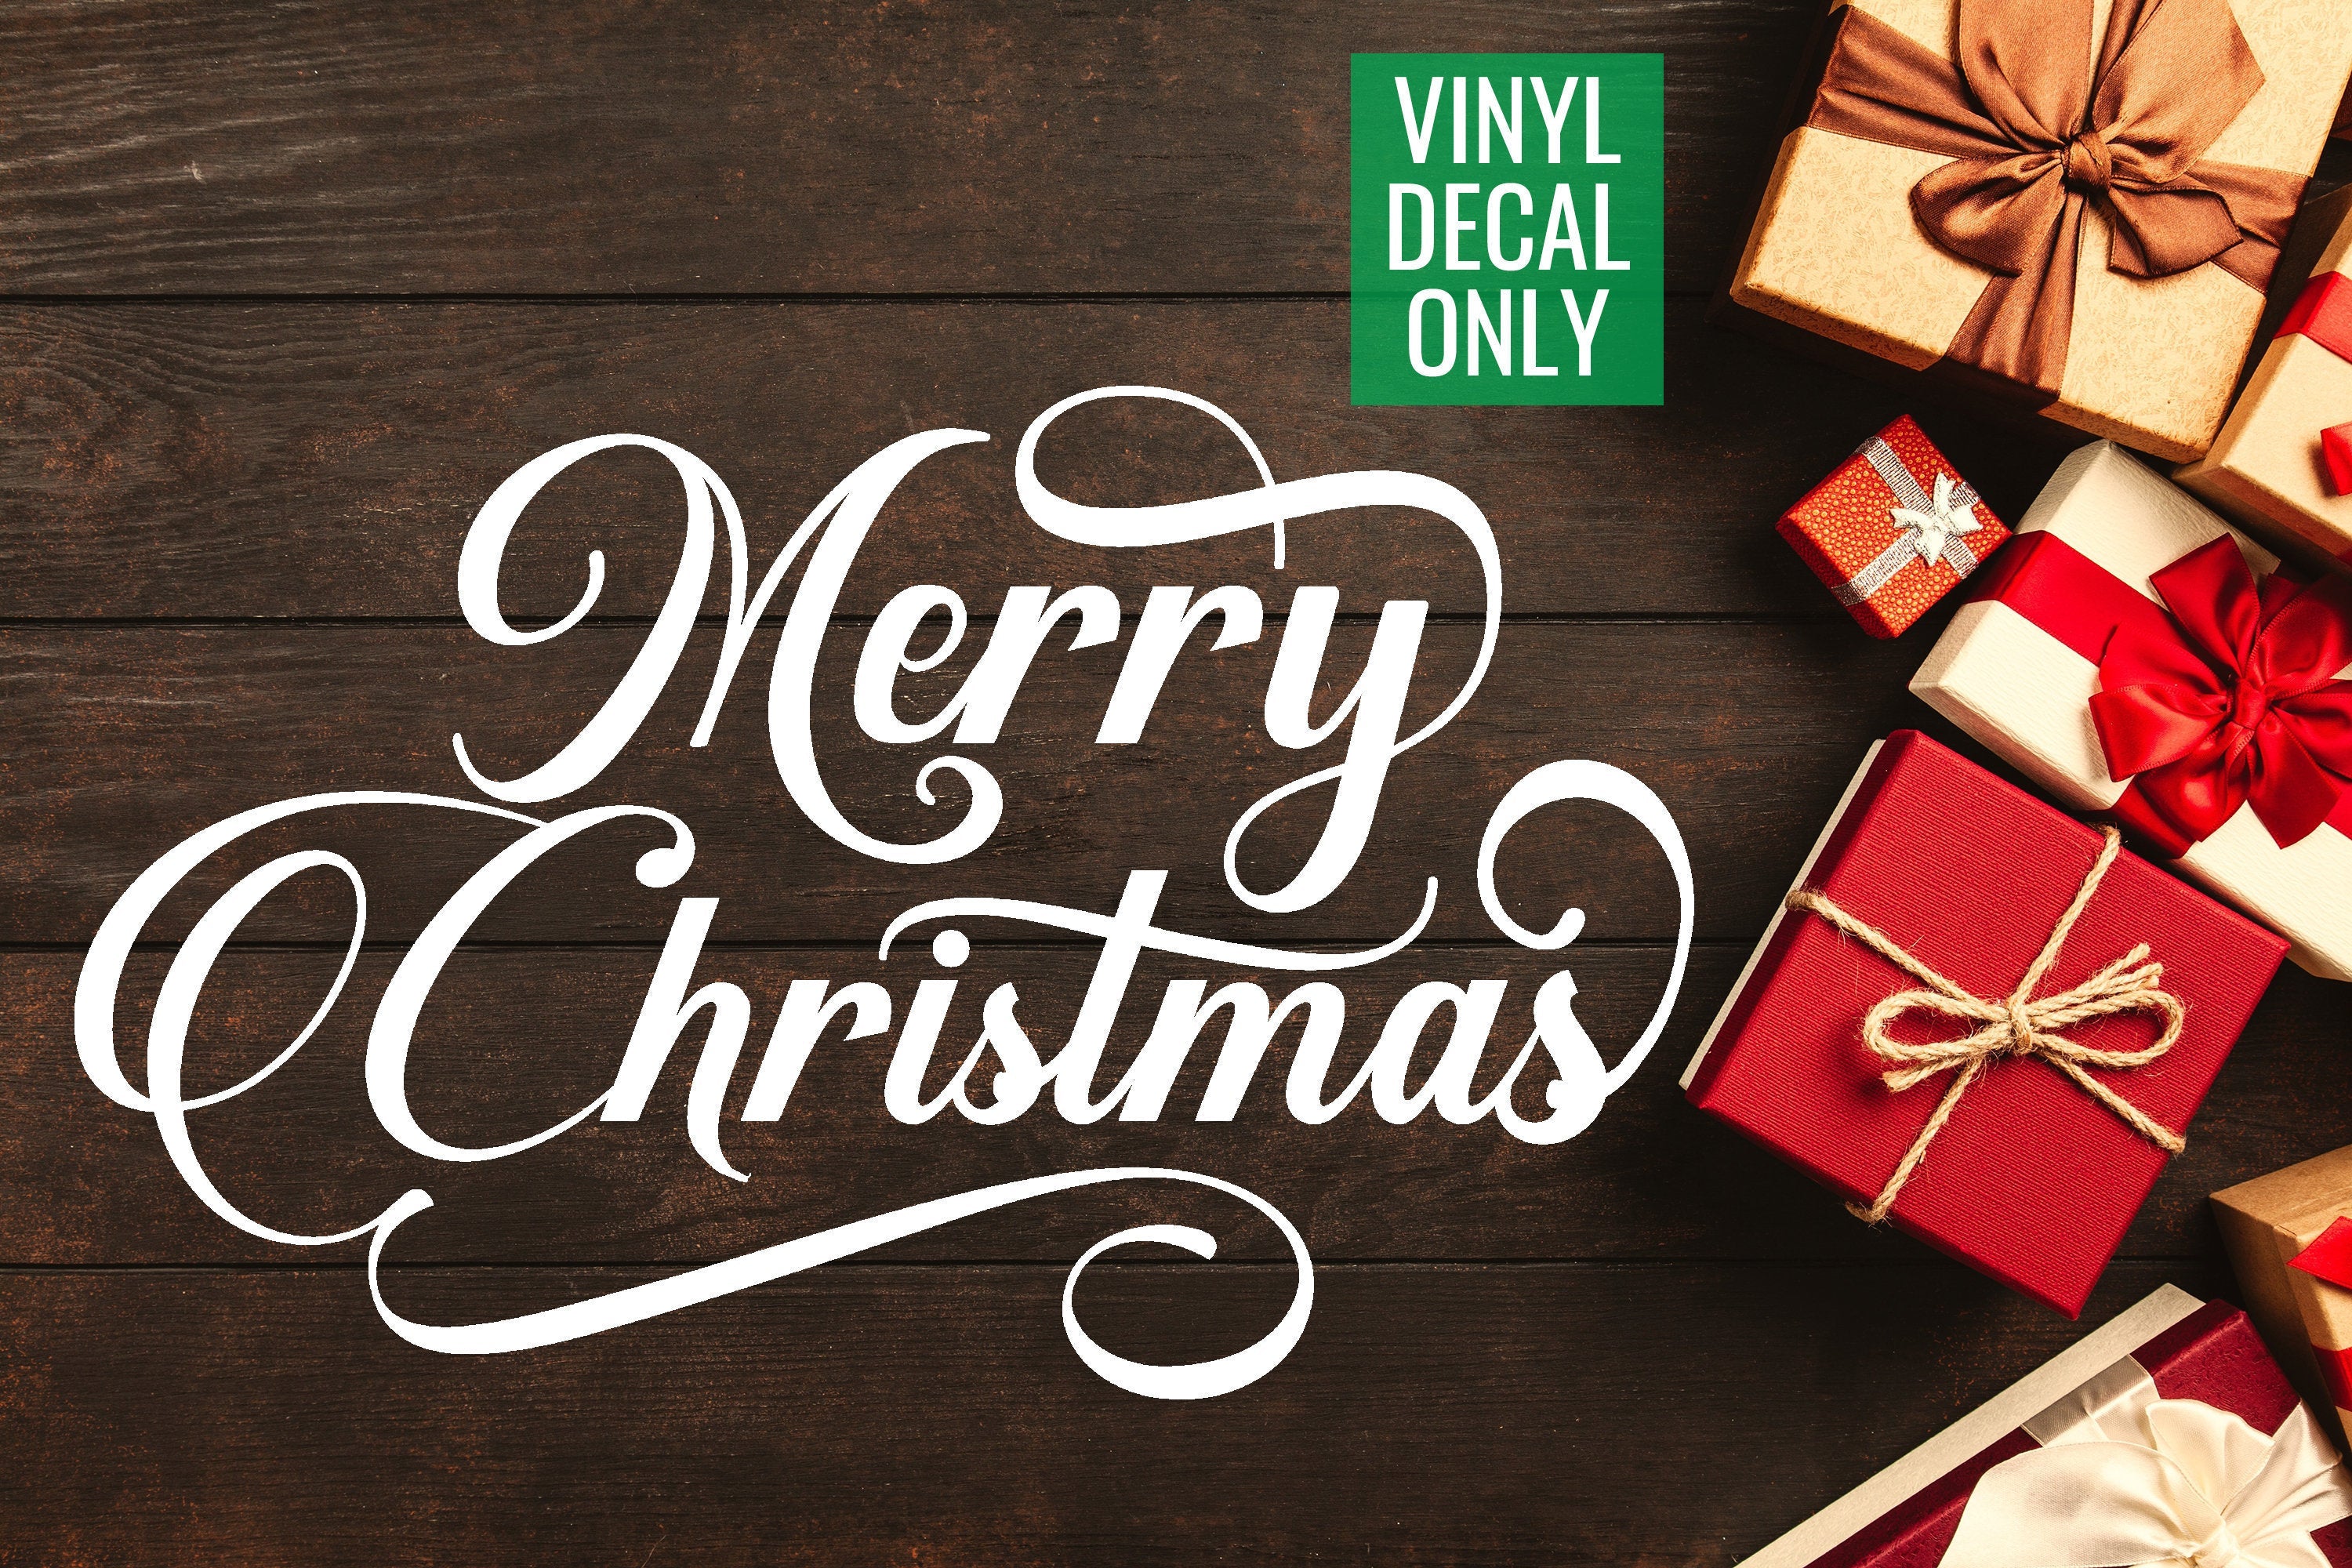 Merry Christmas Vinyl Decal for Signs, Ornaments, Walls, Doors, Glass, Metal, Wood, Decor for Holiday Events,